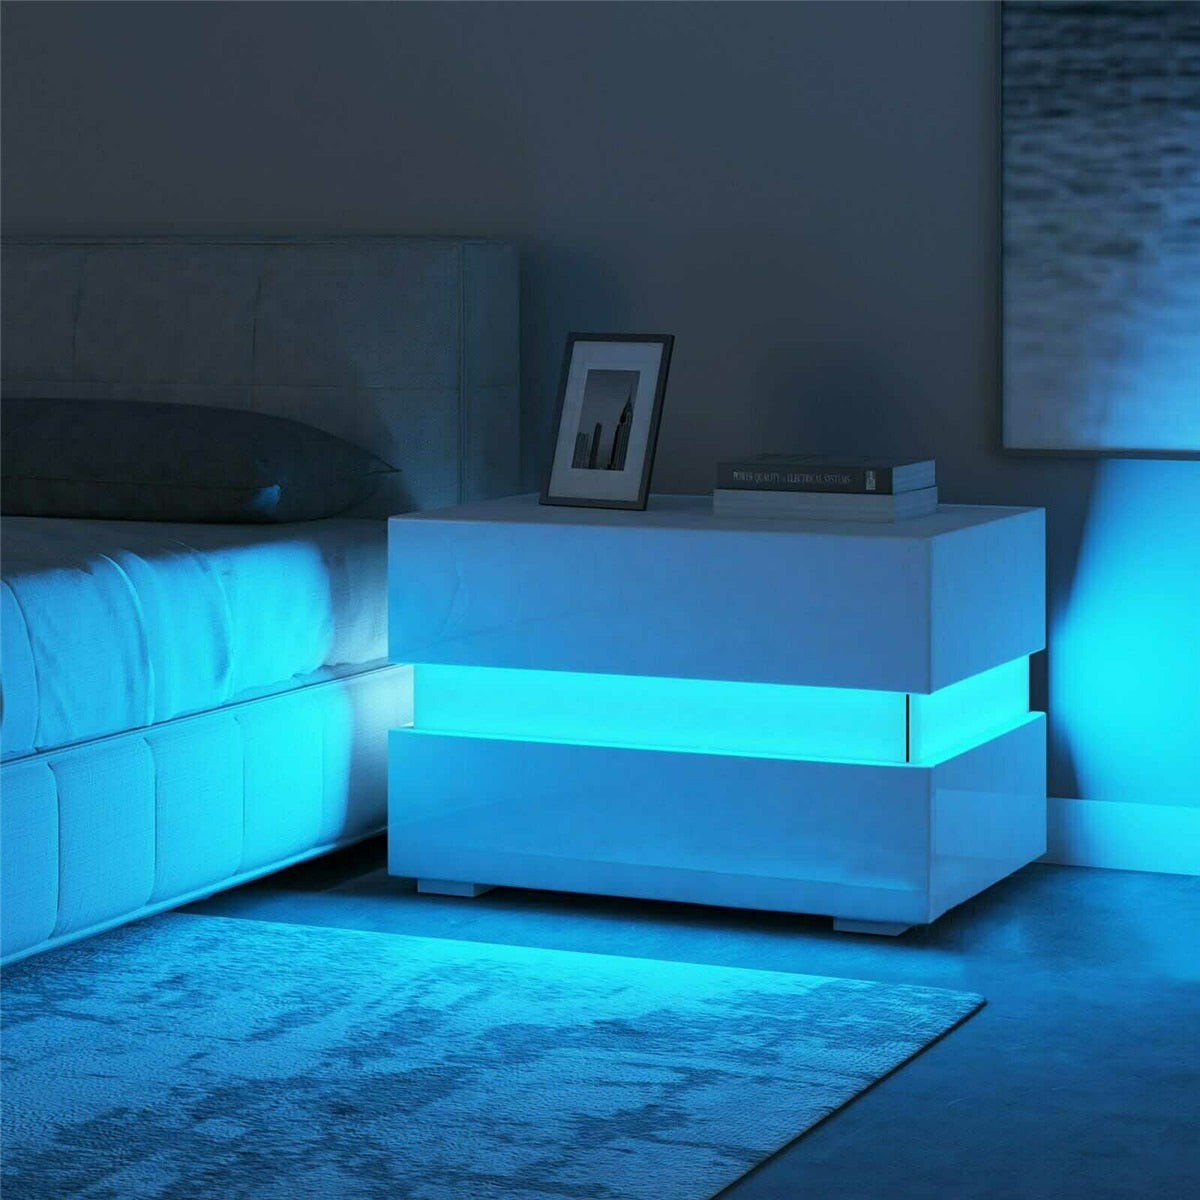 Multifunction RGB LED Nightstands, Home Furniture for Night Lighting